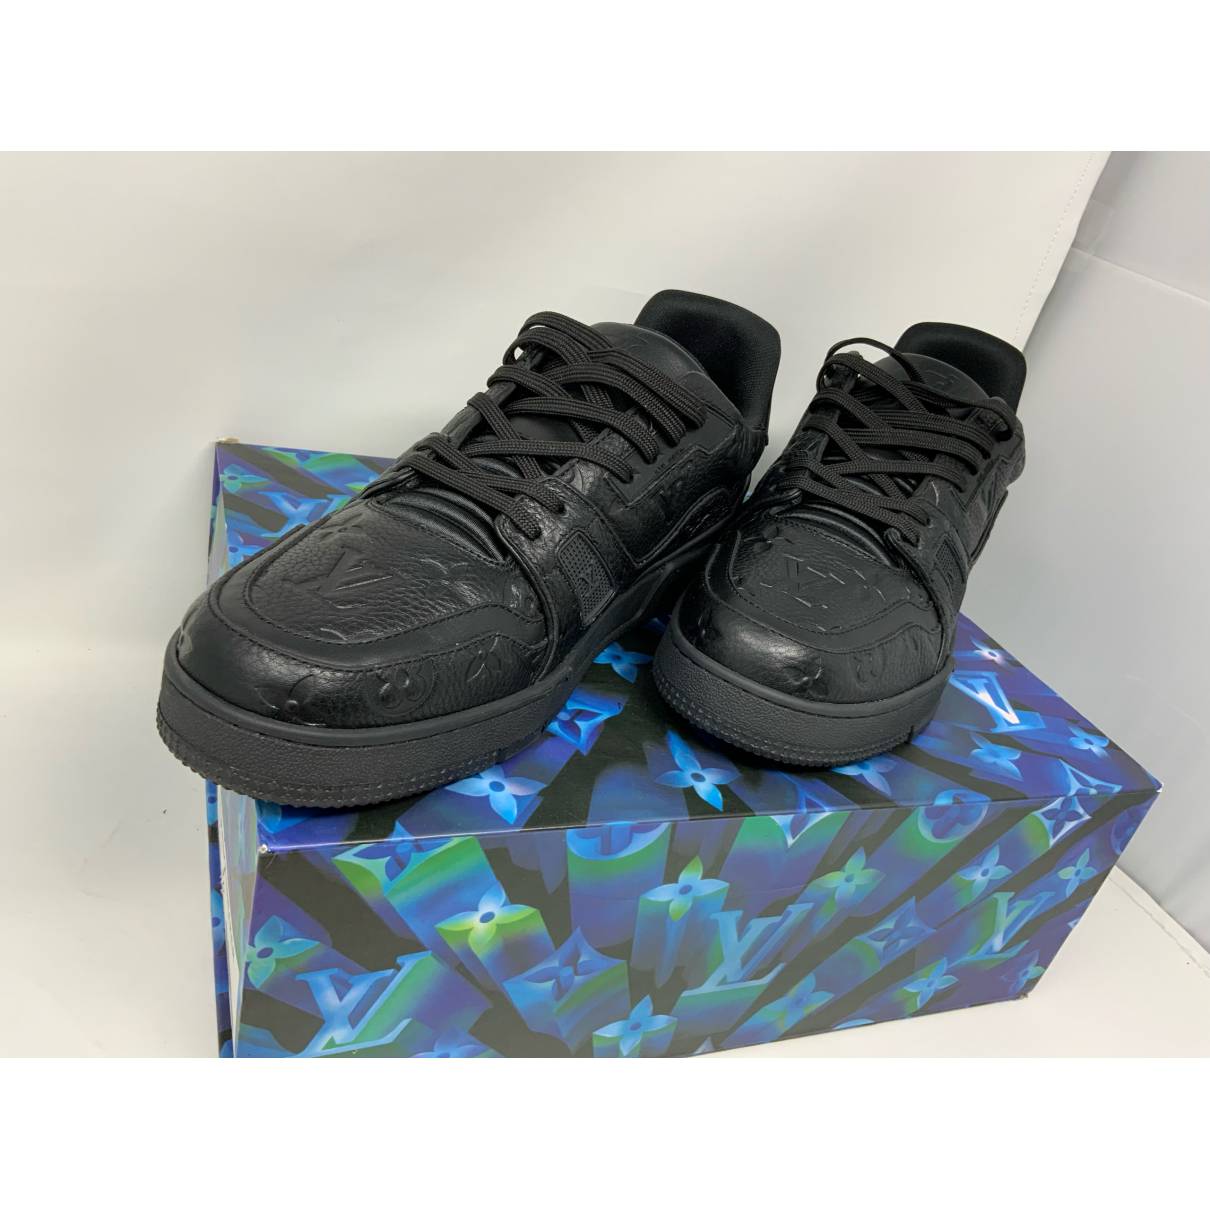 Lv trainer leather low trainers Louis Vuitton Black size 10.5 UK in Leather  - 37130840